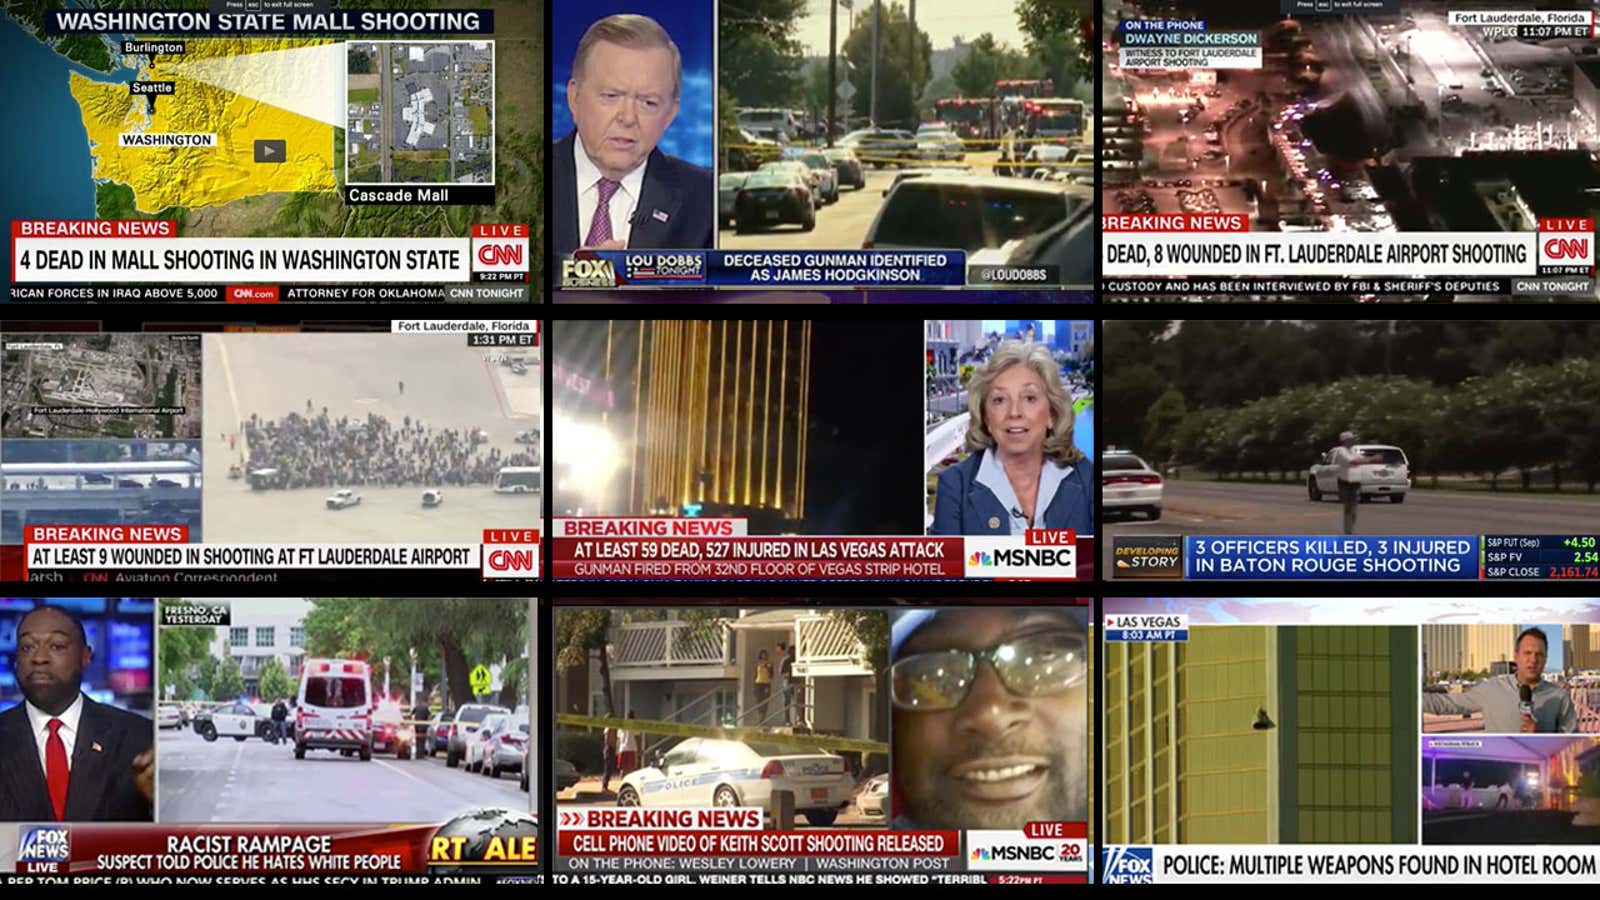 Analysis of 141 hours of cable news reveals how mass killers are really portrayed